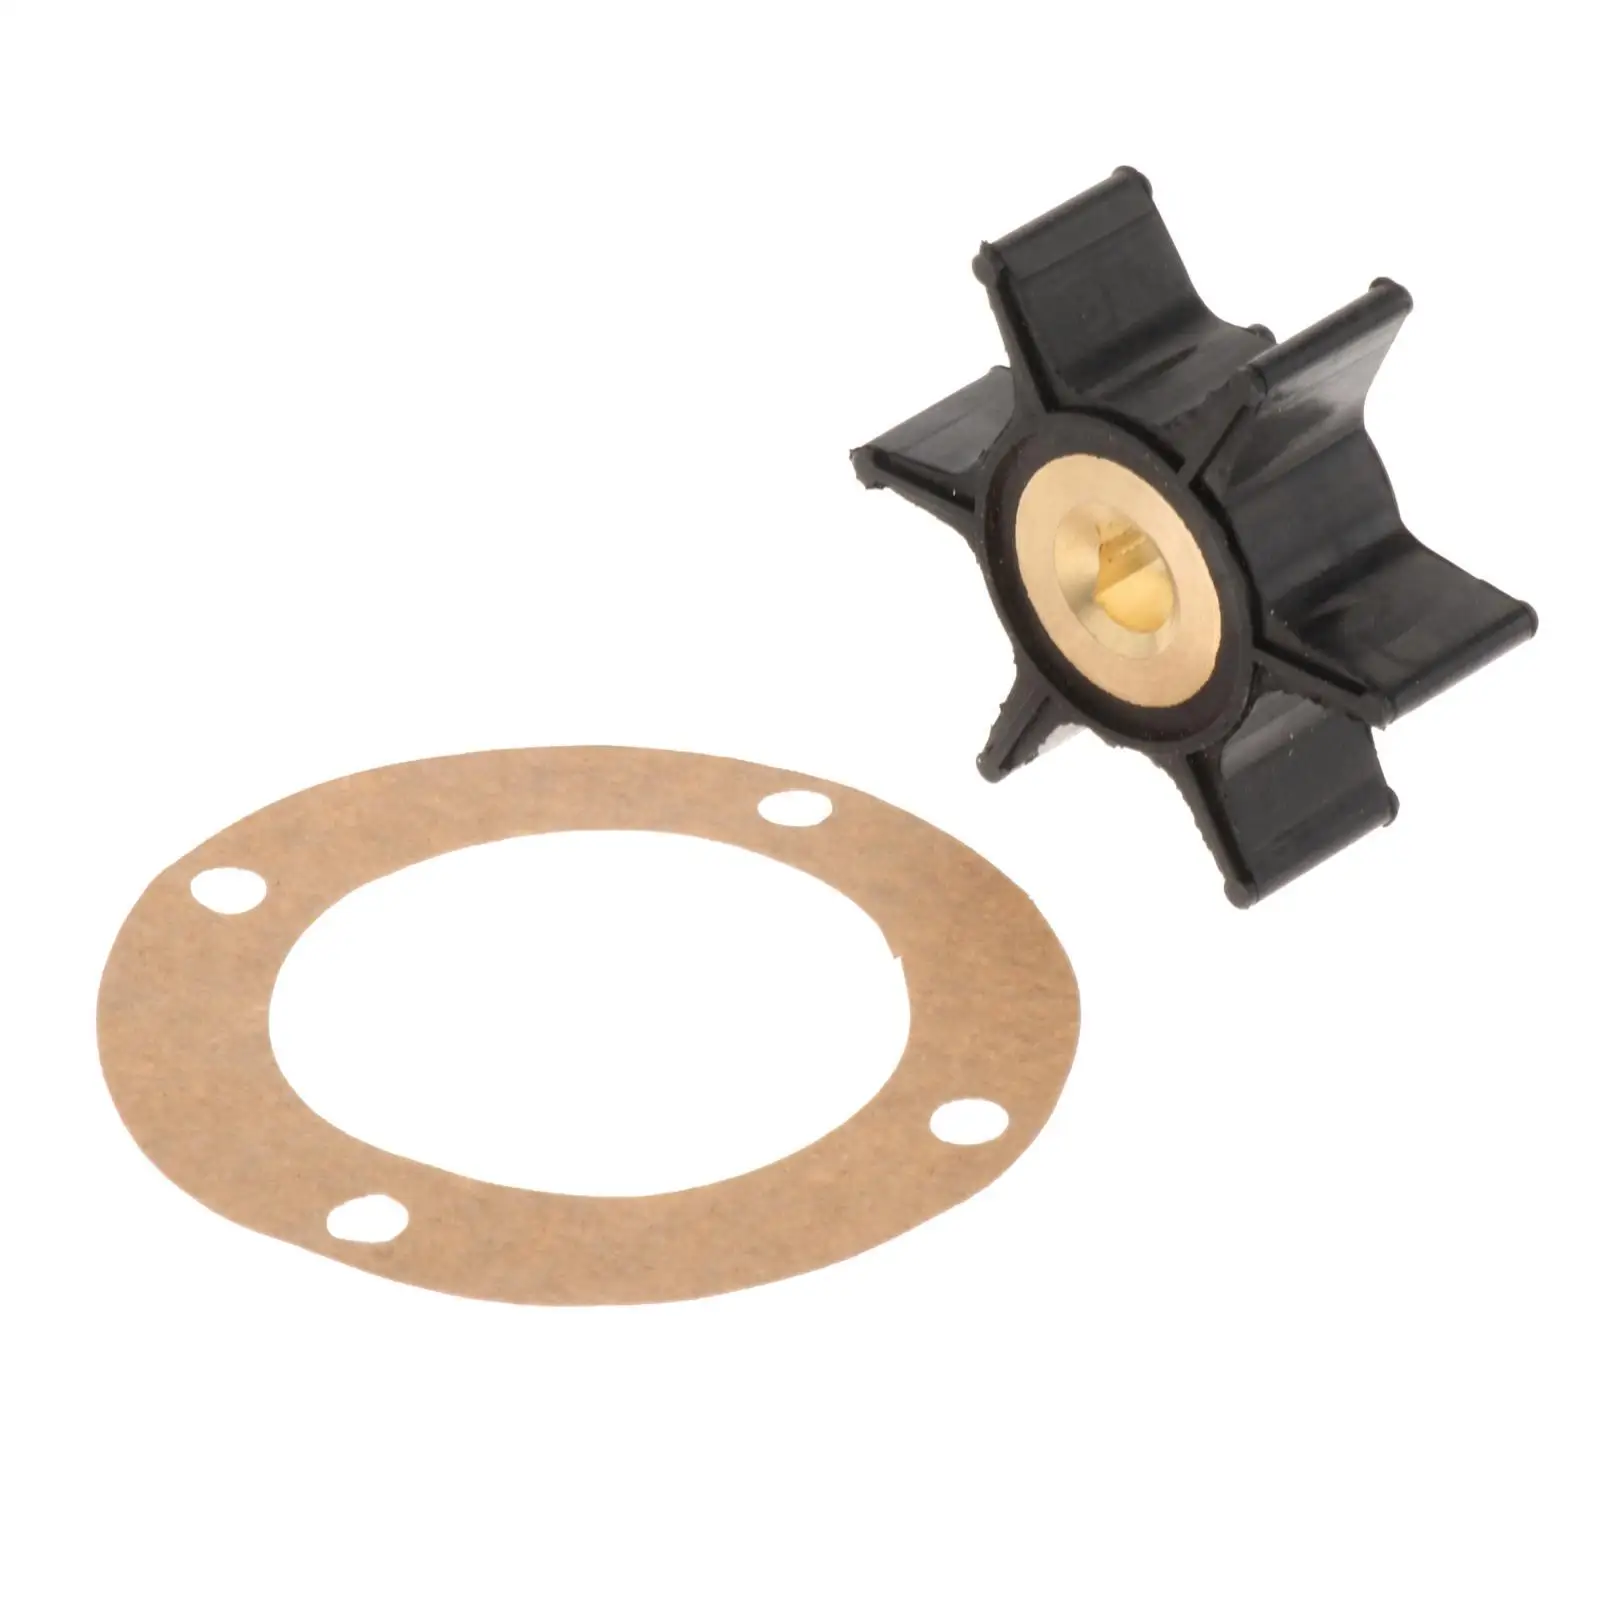 2x Impeller and 4-Hole Gasket Kit Replacement for Onan 131-0386 170-3172 Water Pump